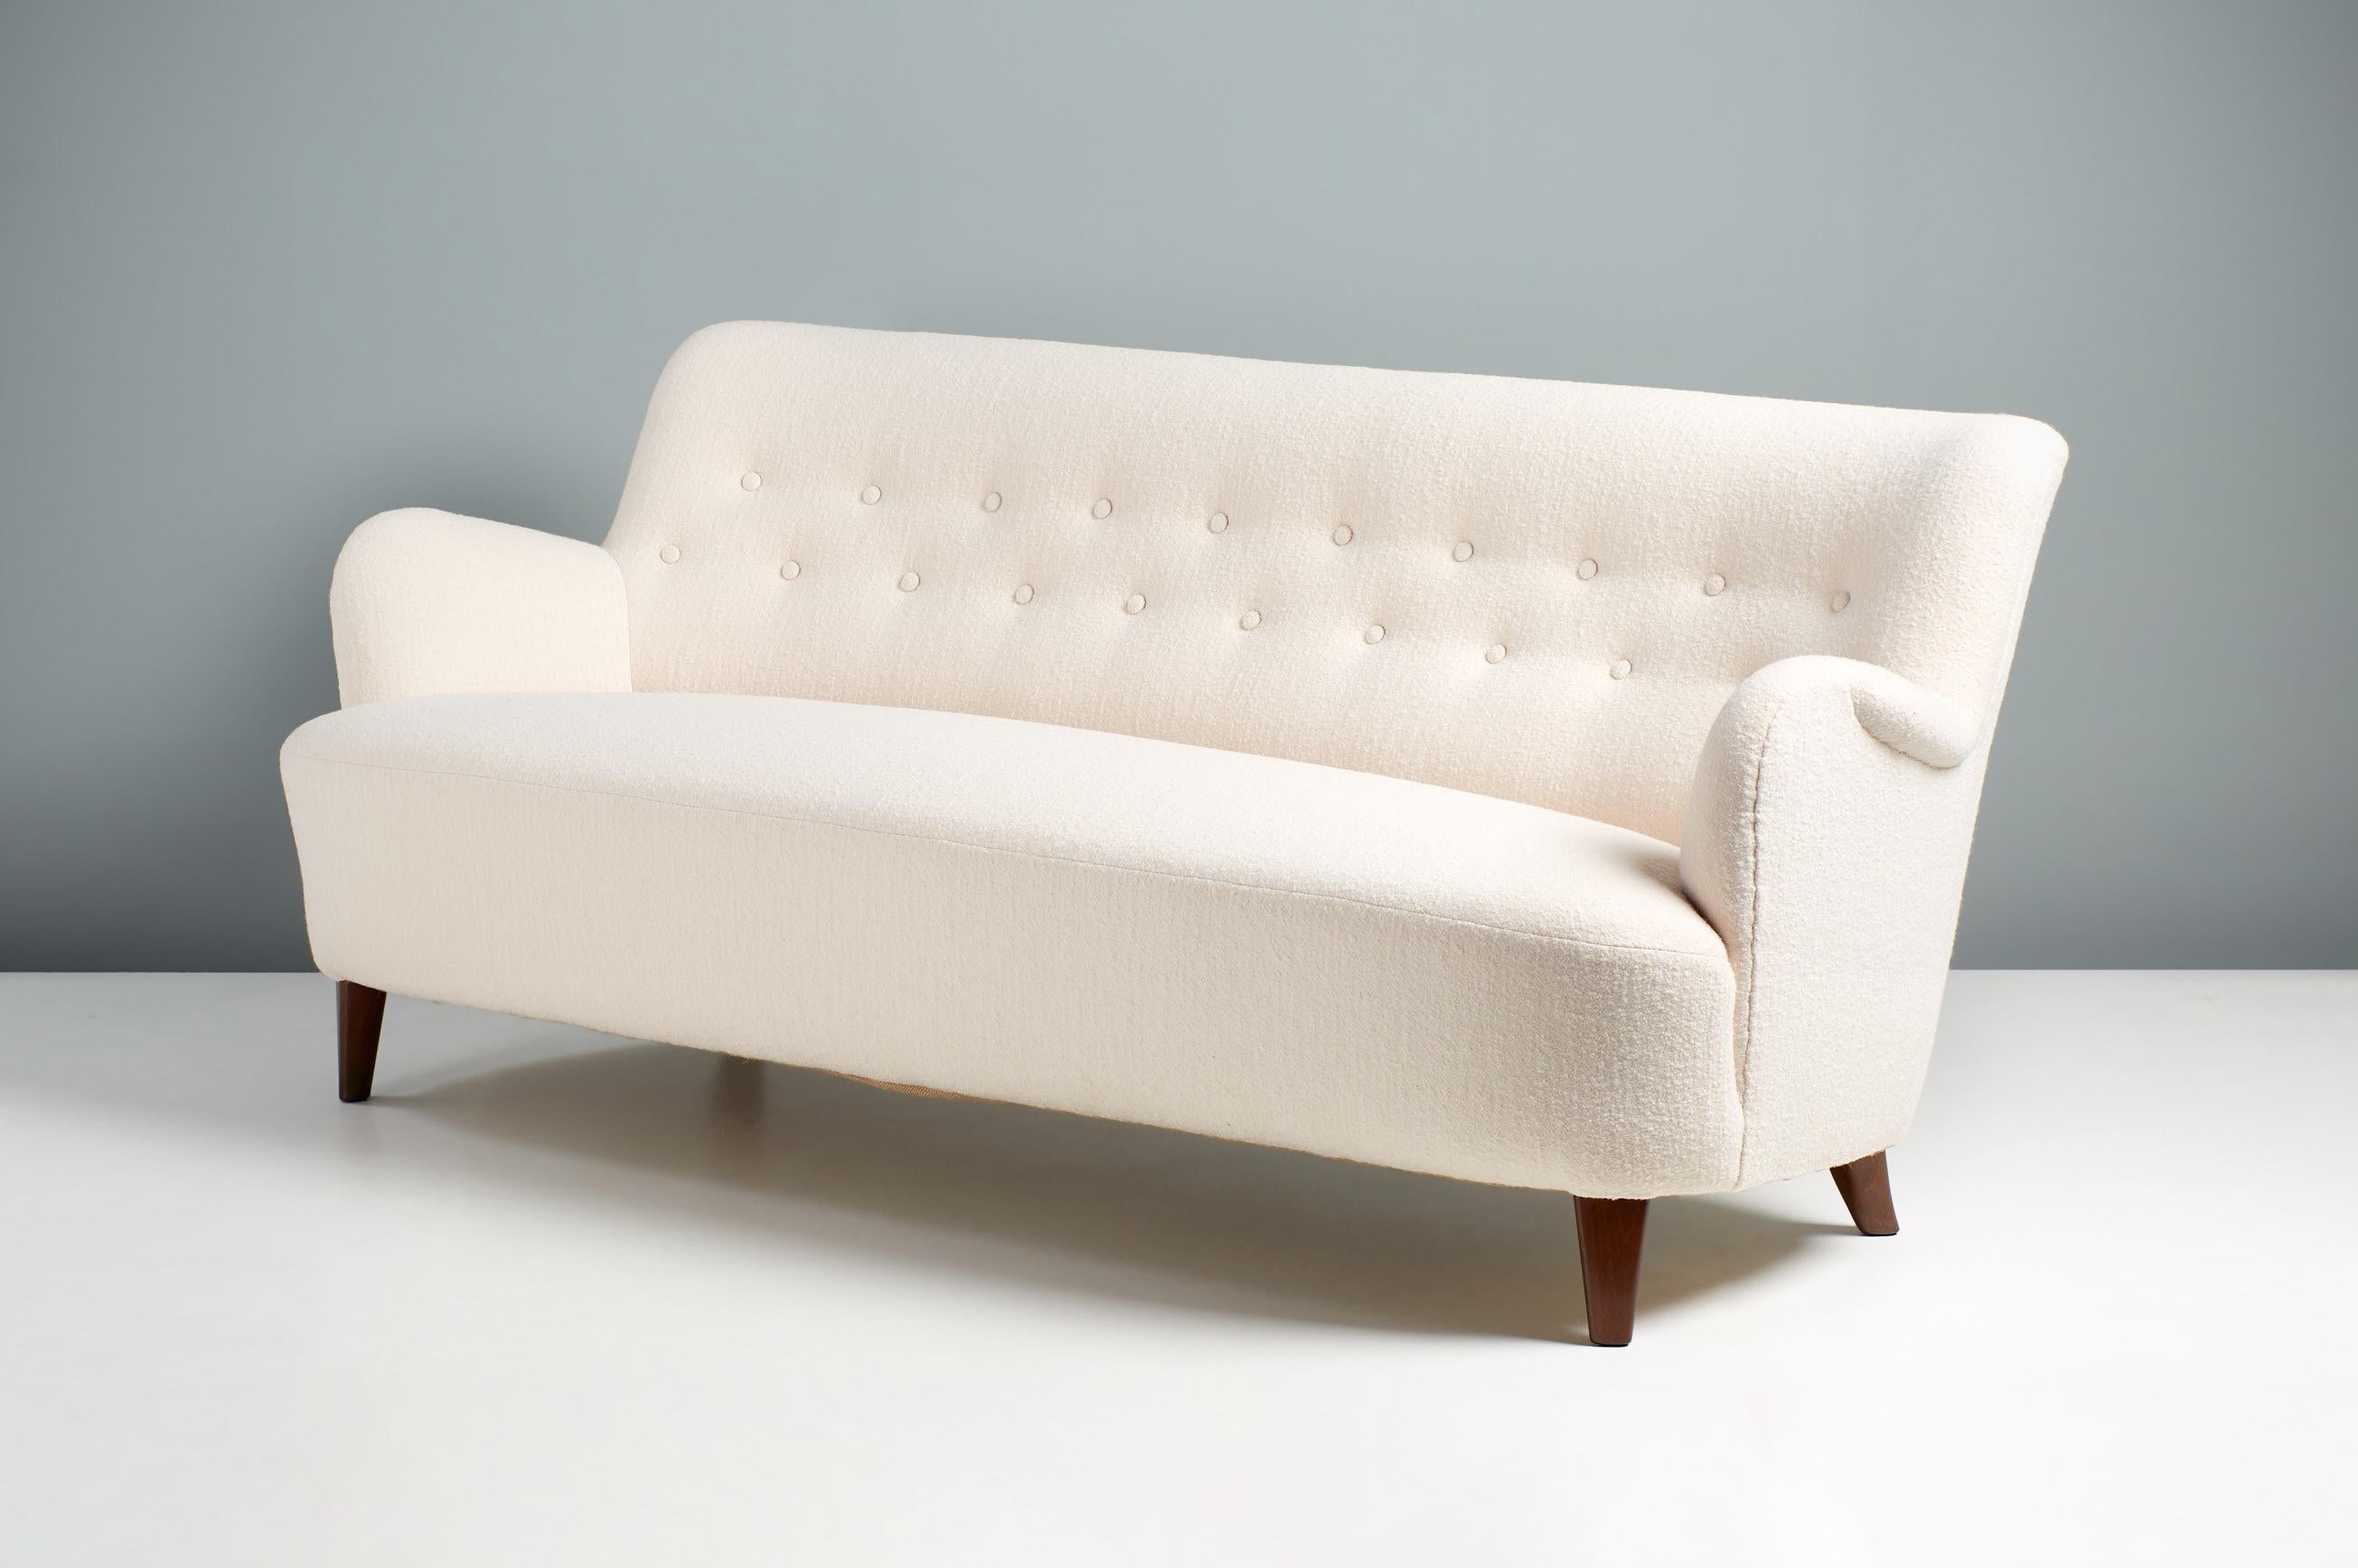 Carl Malmsten Sofa, circa 1950s.

A 3-seat sofa, designed in the 1950s by Swedish Master designer: Carl Malmsten and produced in Sweden. The sofa has stained elm wood legs and has been reupholstered in Chase Erwin ‘Laine Snow’ pure wool fabric.